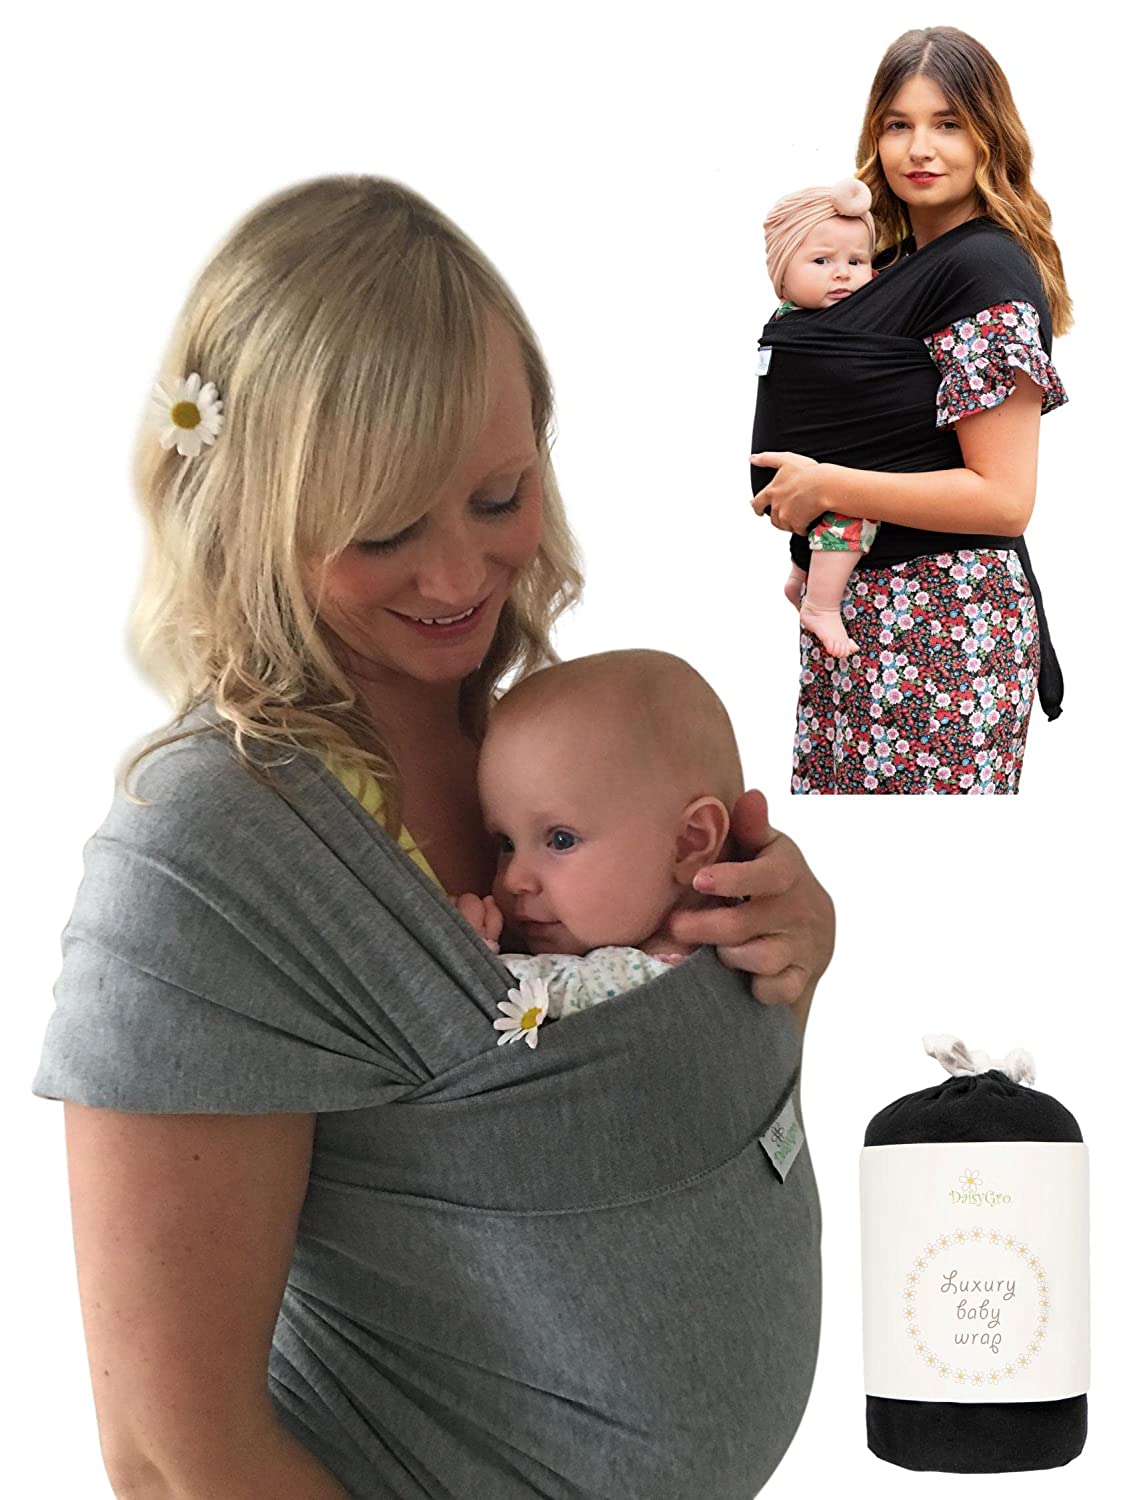 DaisyGro High Quality Baby Carrier for Newborns, Infants, Toddlers | to create a natural | for Breastfeeding – Breathable Soft Cotton | Grey | Ideal Gift